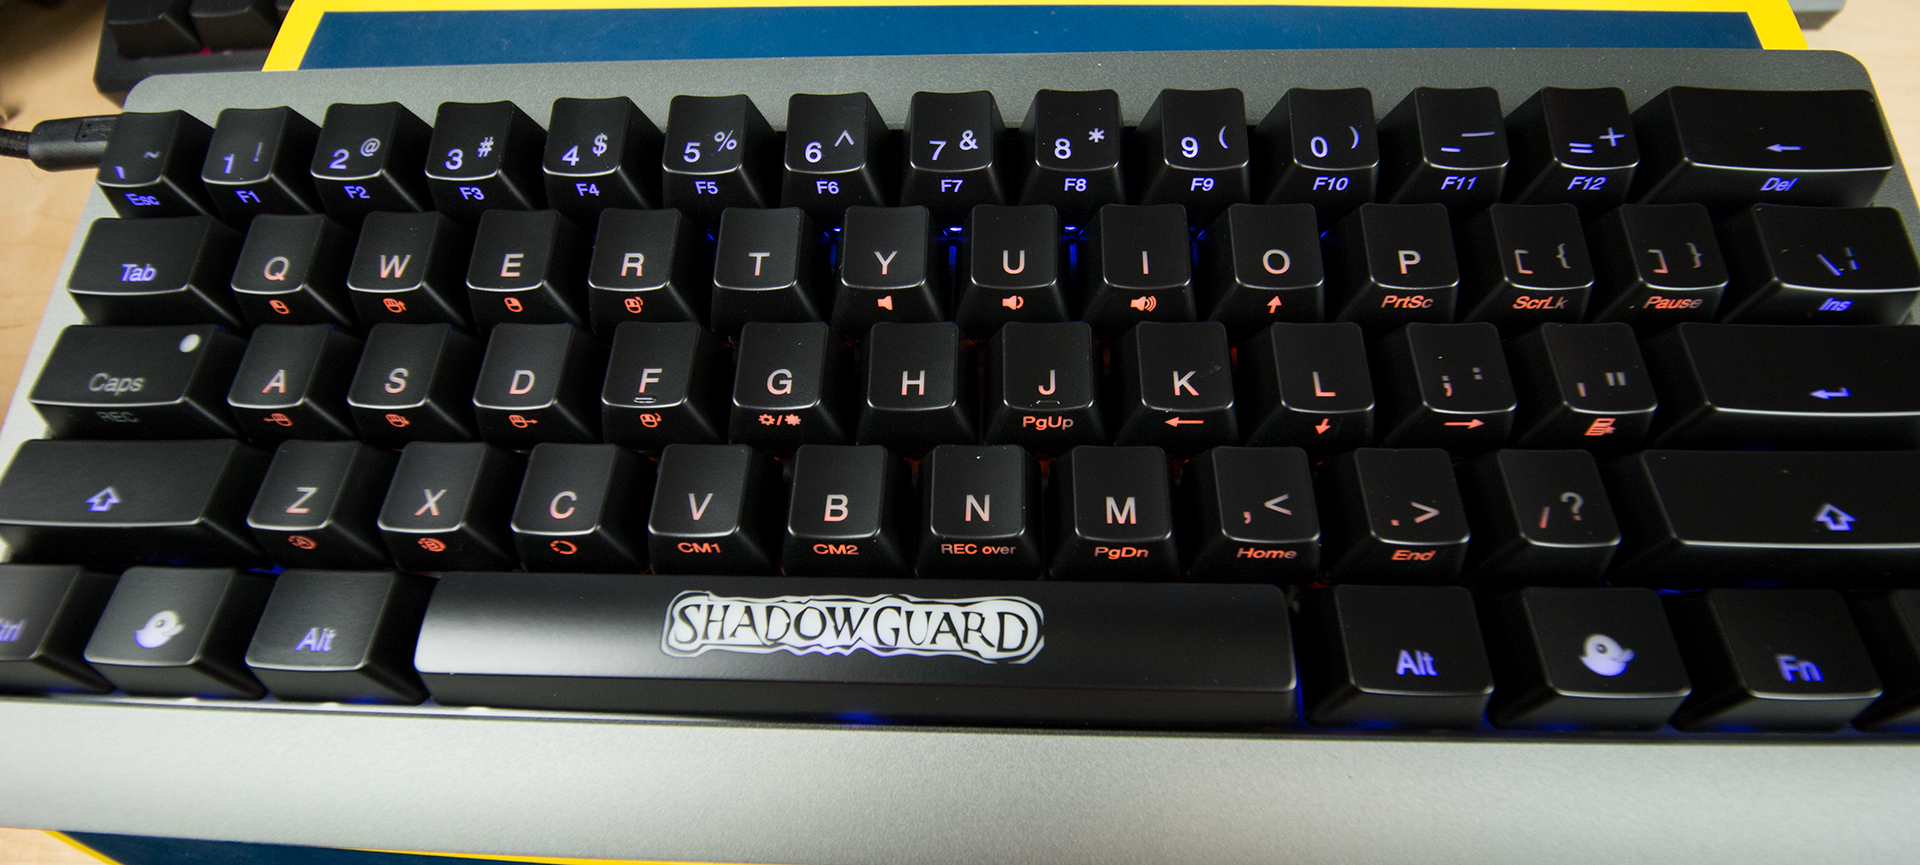 Don’t Know Much About Heroes Of Shadow Guard, But It’s Got A Lovely Keyboard